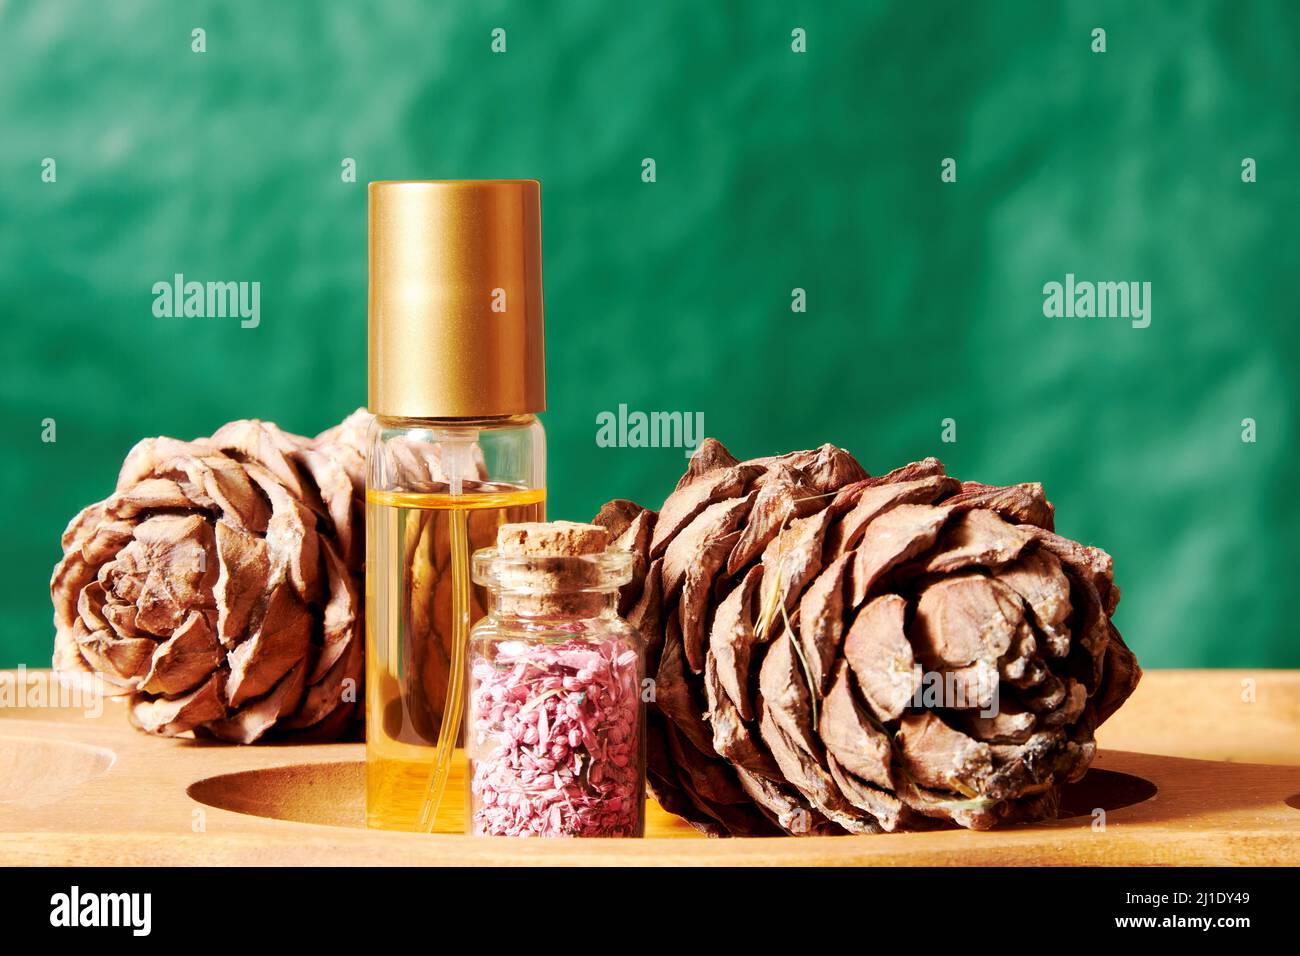 Perfume jar and decorative vial with scented petals on the beauty shop display. Fashion and beauty backgrounds and templates Stock Photo